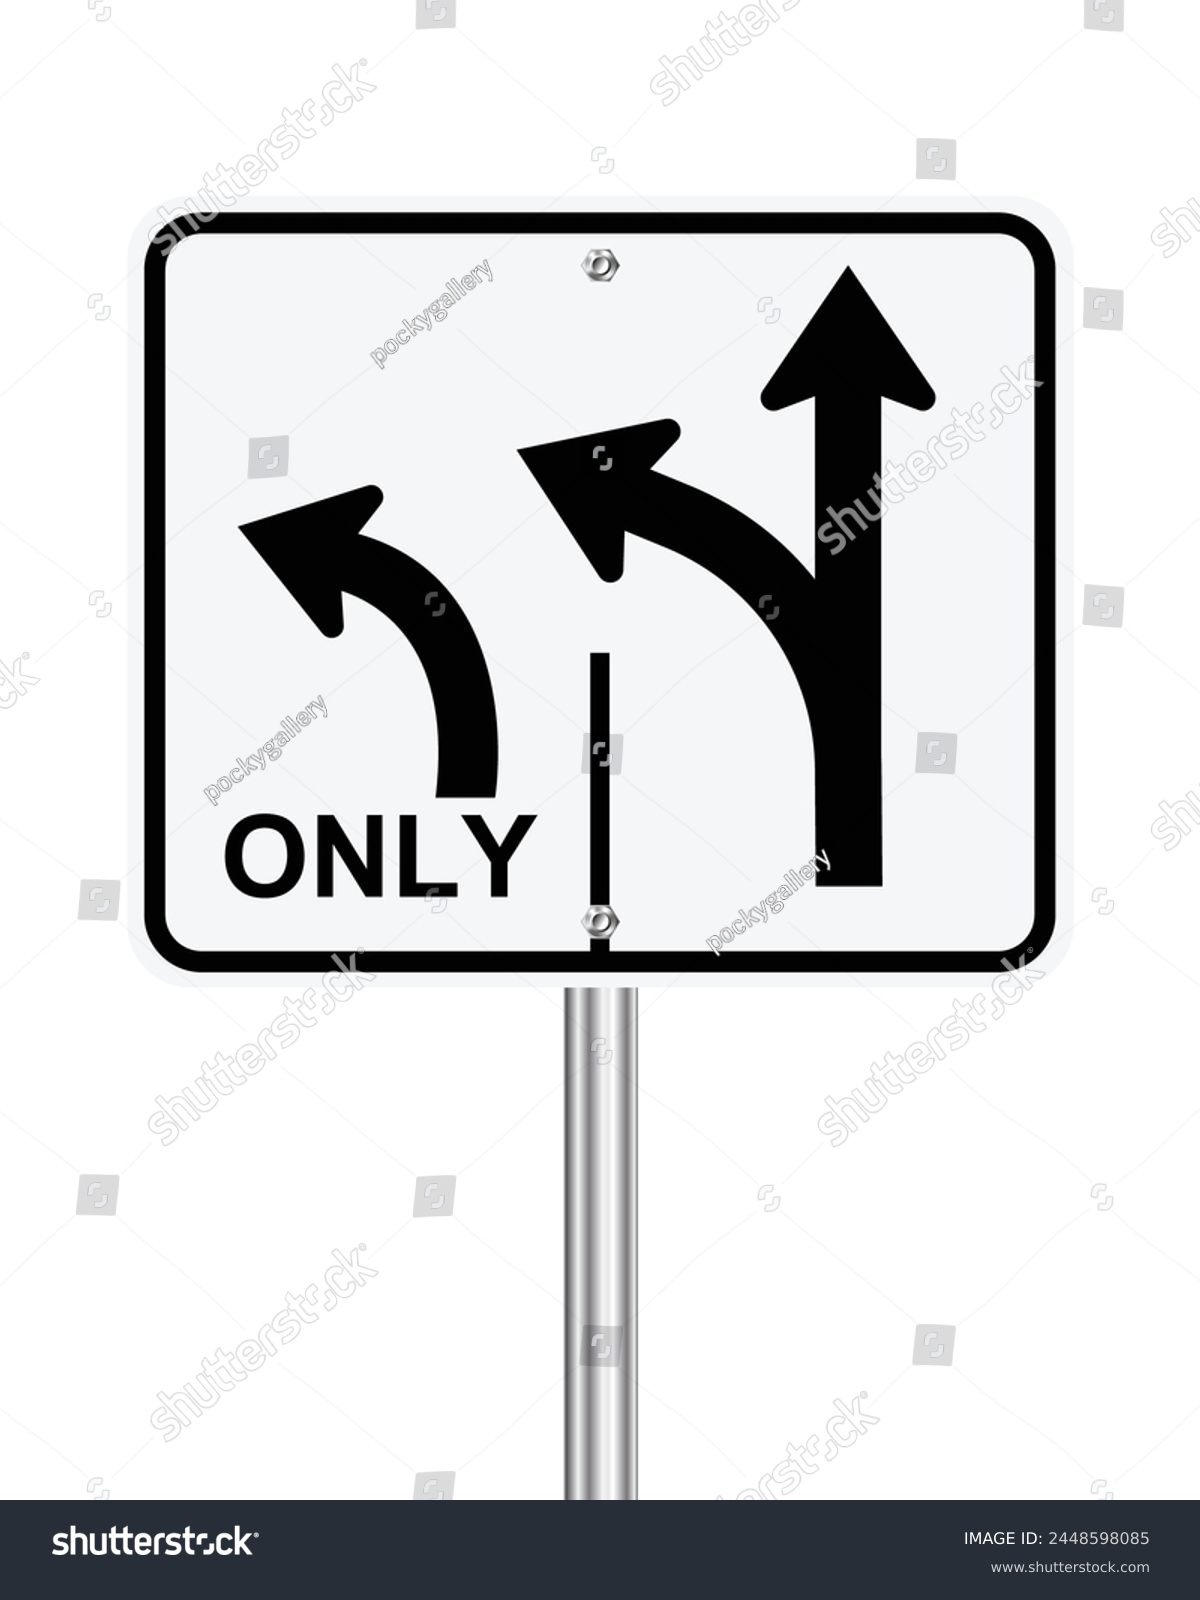 SVG of Advance intersection two lanes control traffic sign on white background svg